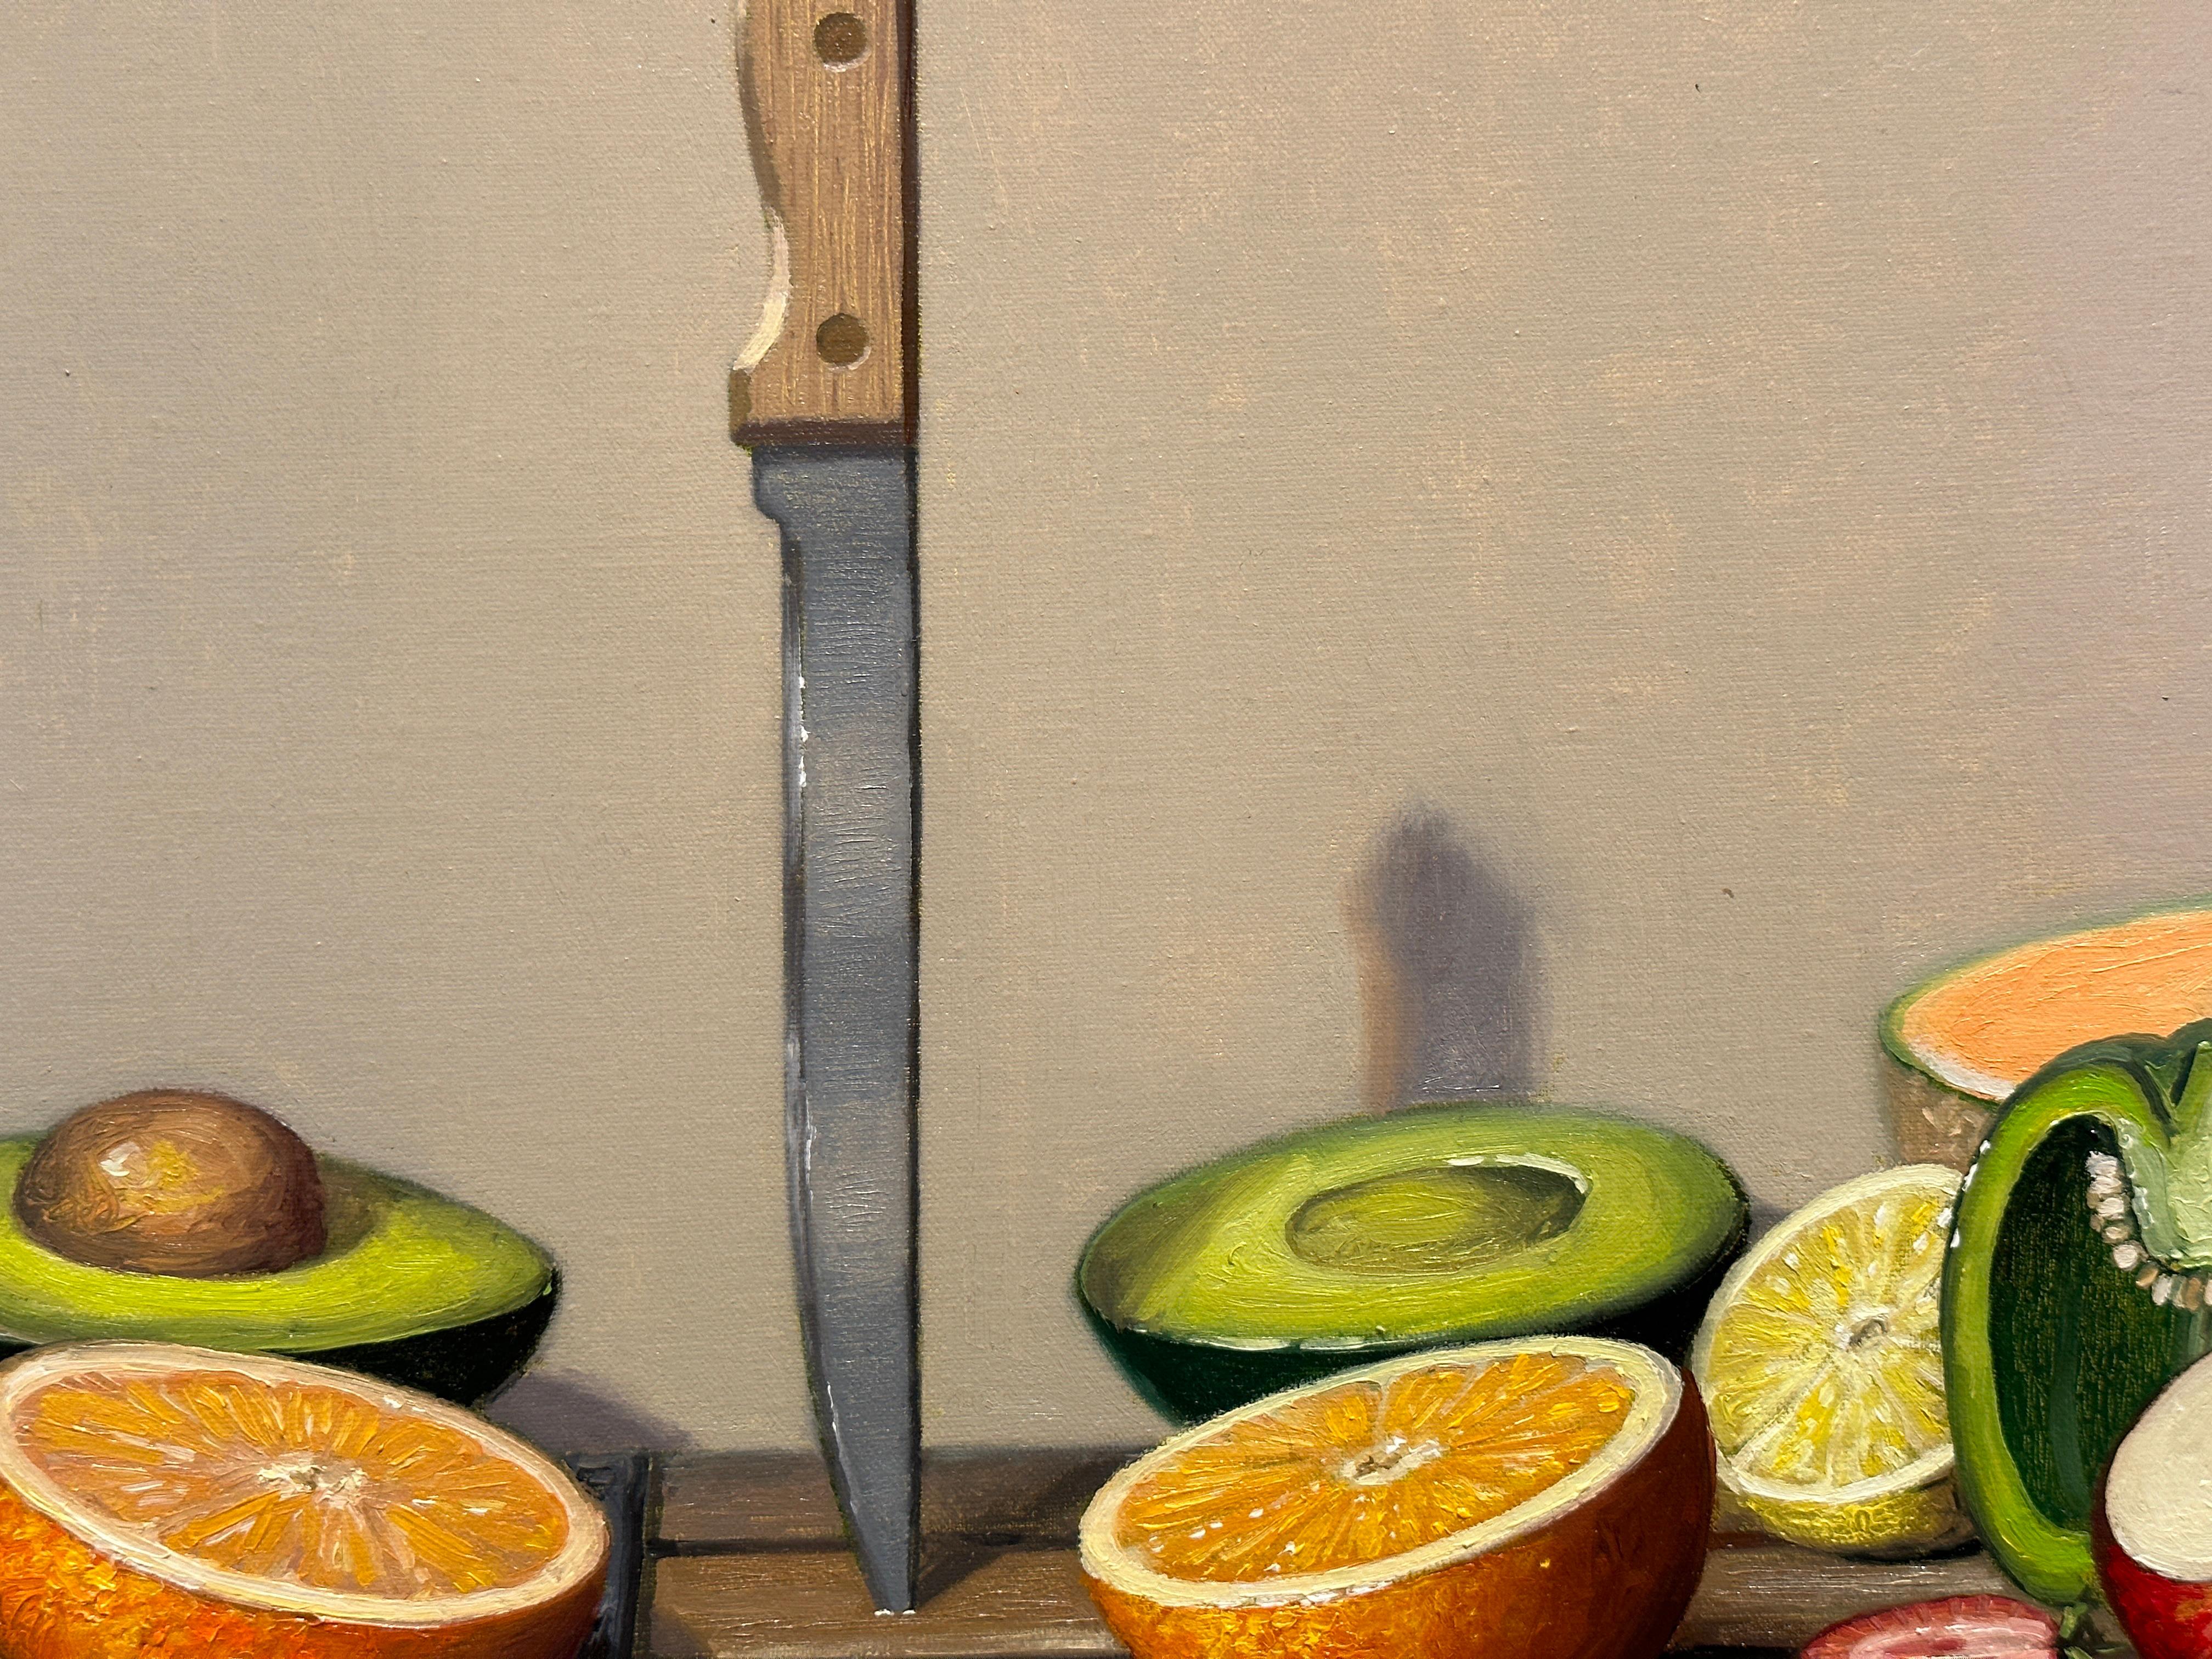 HALFSIES - Contemporary Realism / Food Art / Still Life For Sale 1